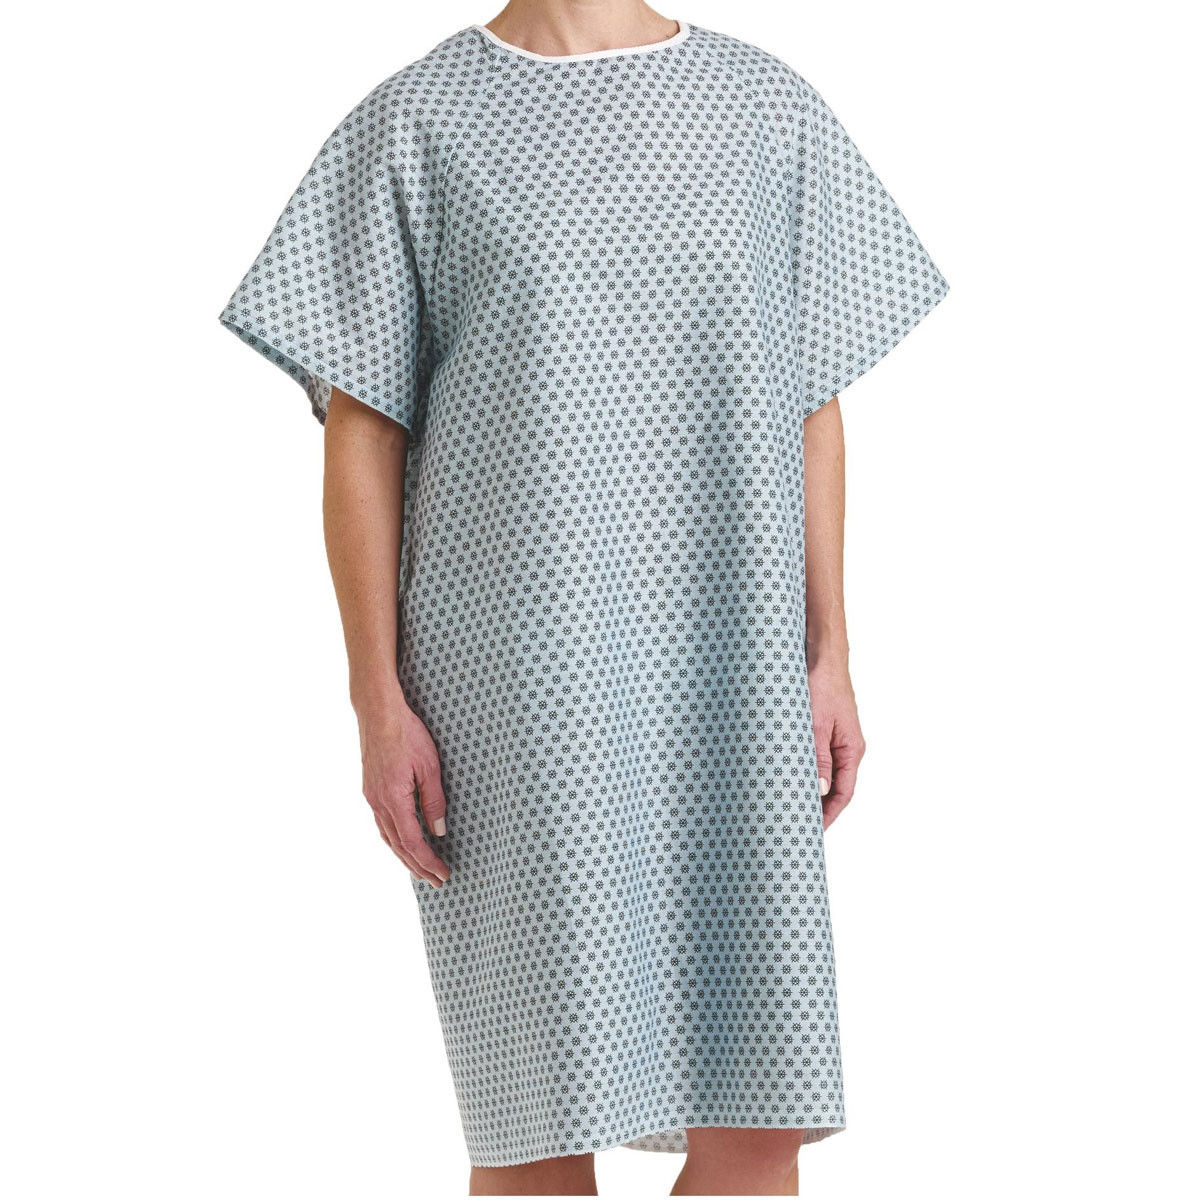 What is the design on this hospital gown called?